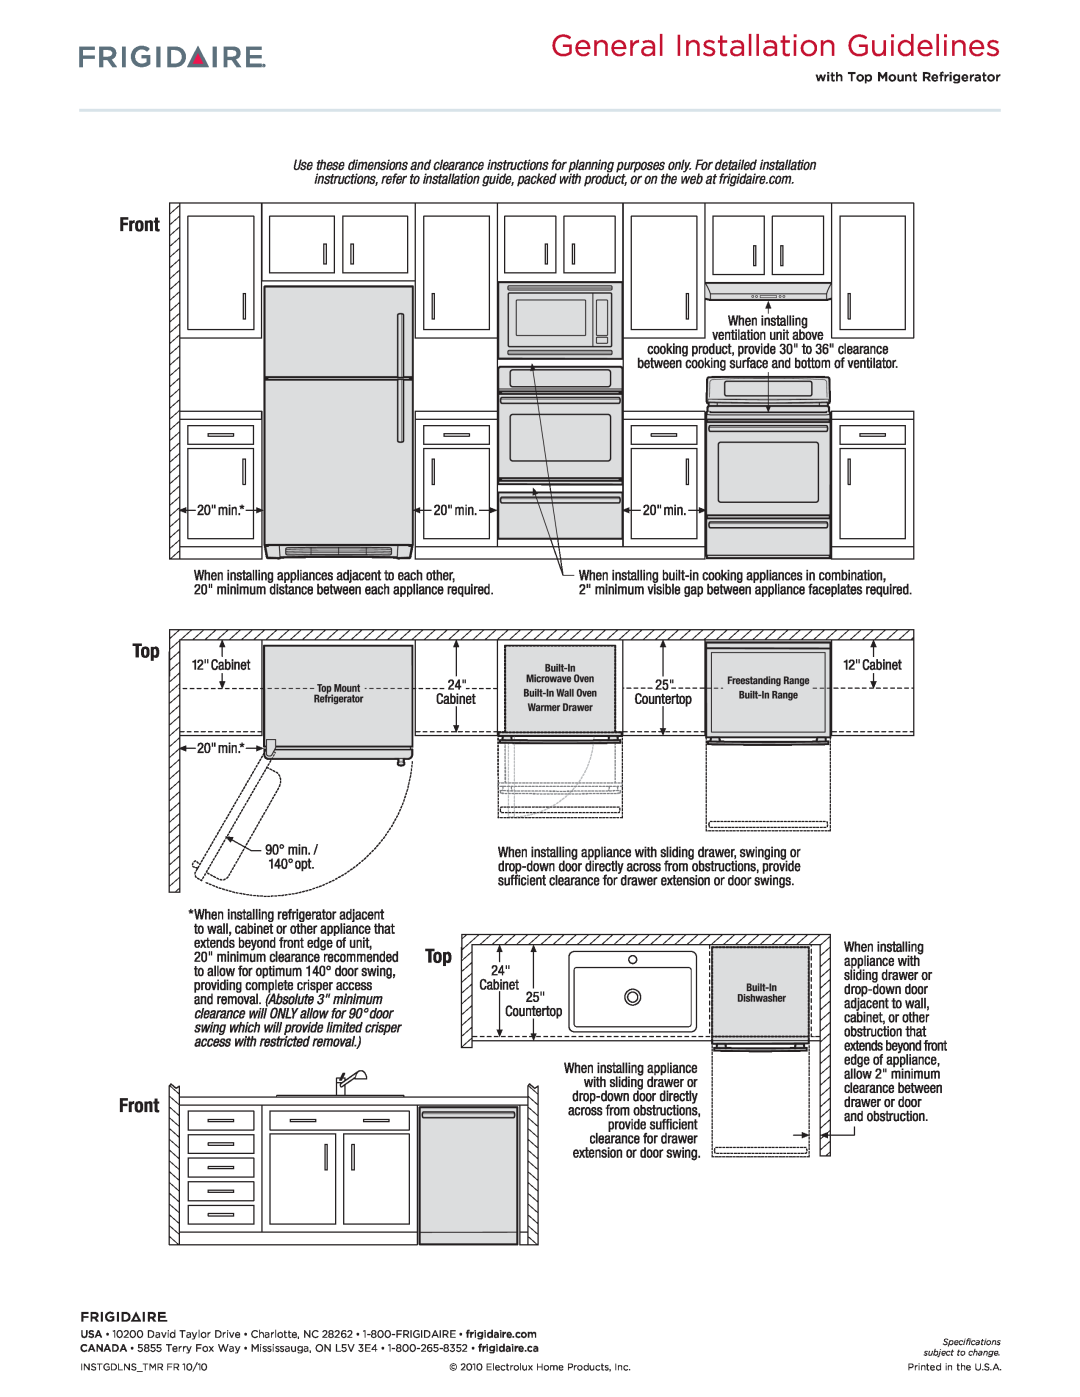 Frigidaire PL36WC41EC General Installation Guidelines, Top Front, with Top Mount Refrigerator, INSTGDLNS_TMR FR 10/10 